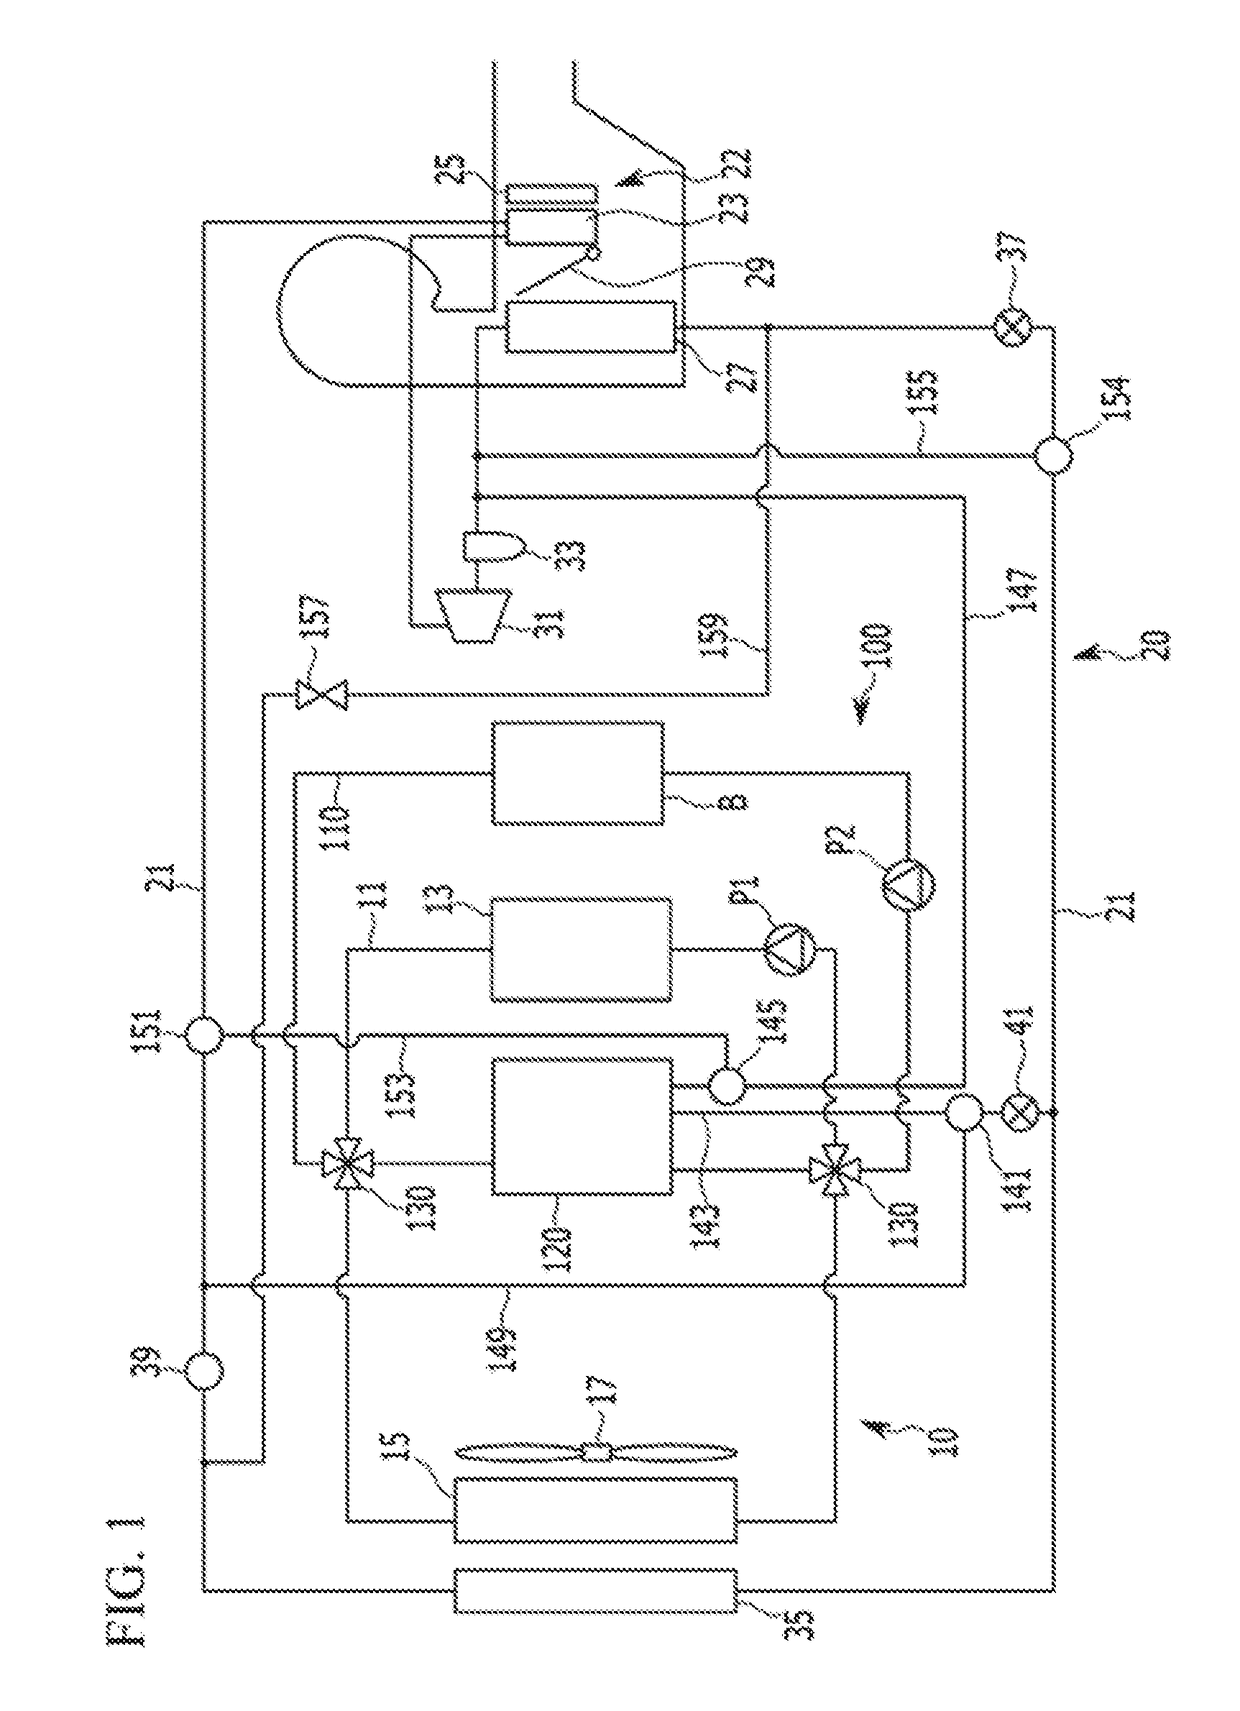 Battery cooling system for a vehicle